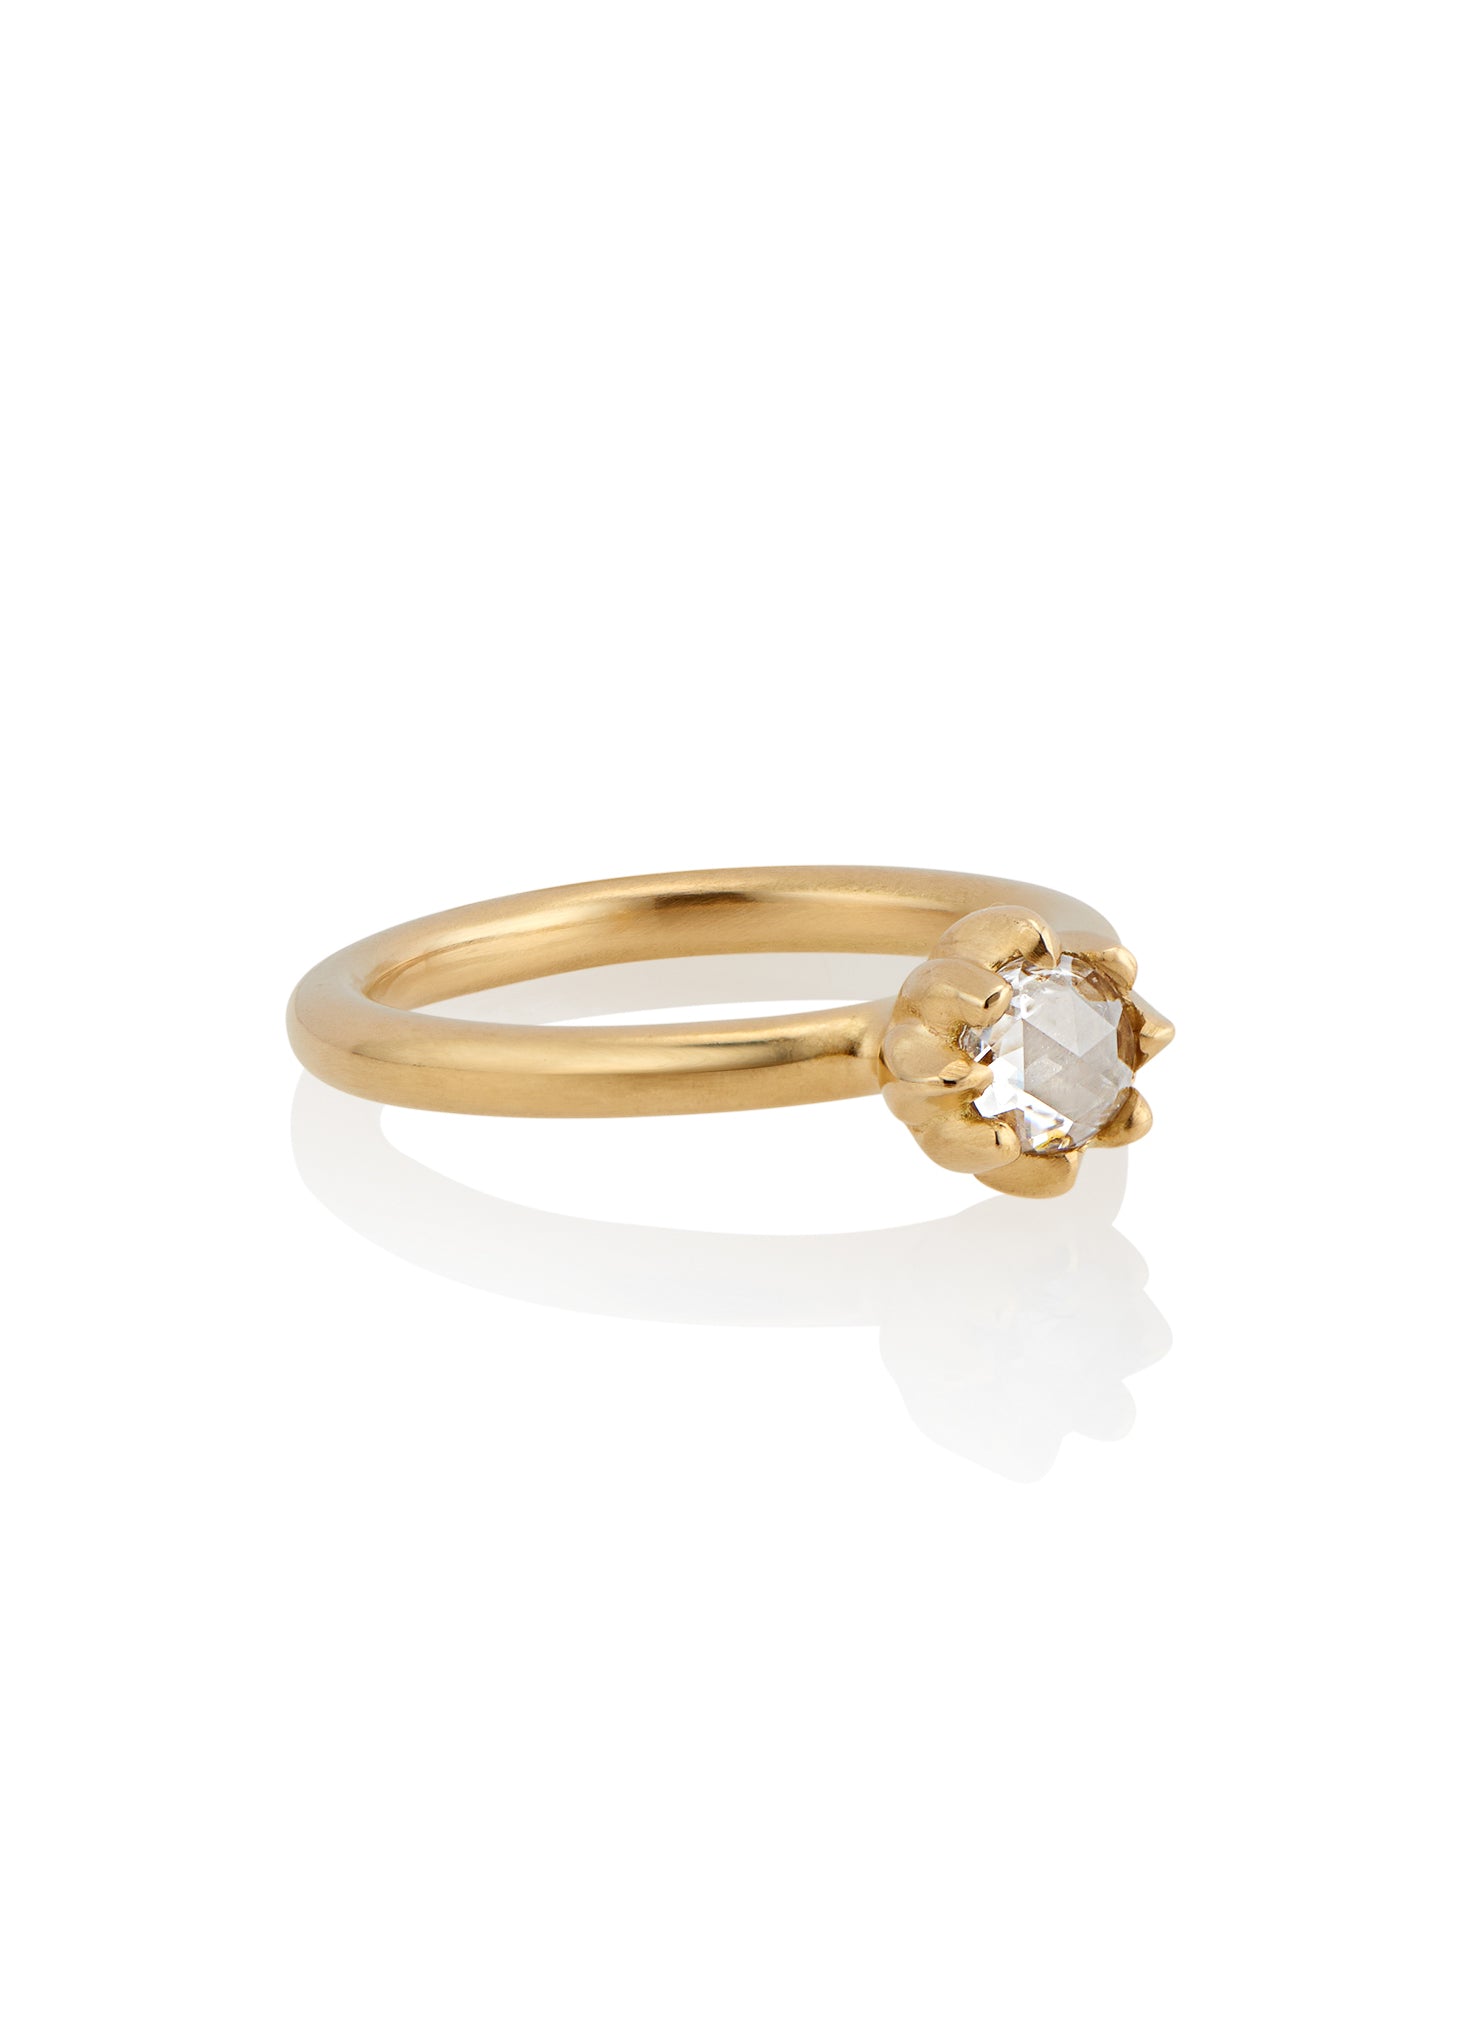 In simplicity, majesty is revealed. Inspired by the stark and graphic botanical photographs of Karl Blossfeldt, the Fleur ring creates a striking silhouette on the finger, its clean gold band showcasing a regal and romantic rose cut diamond. 